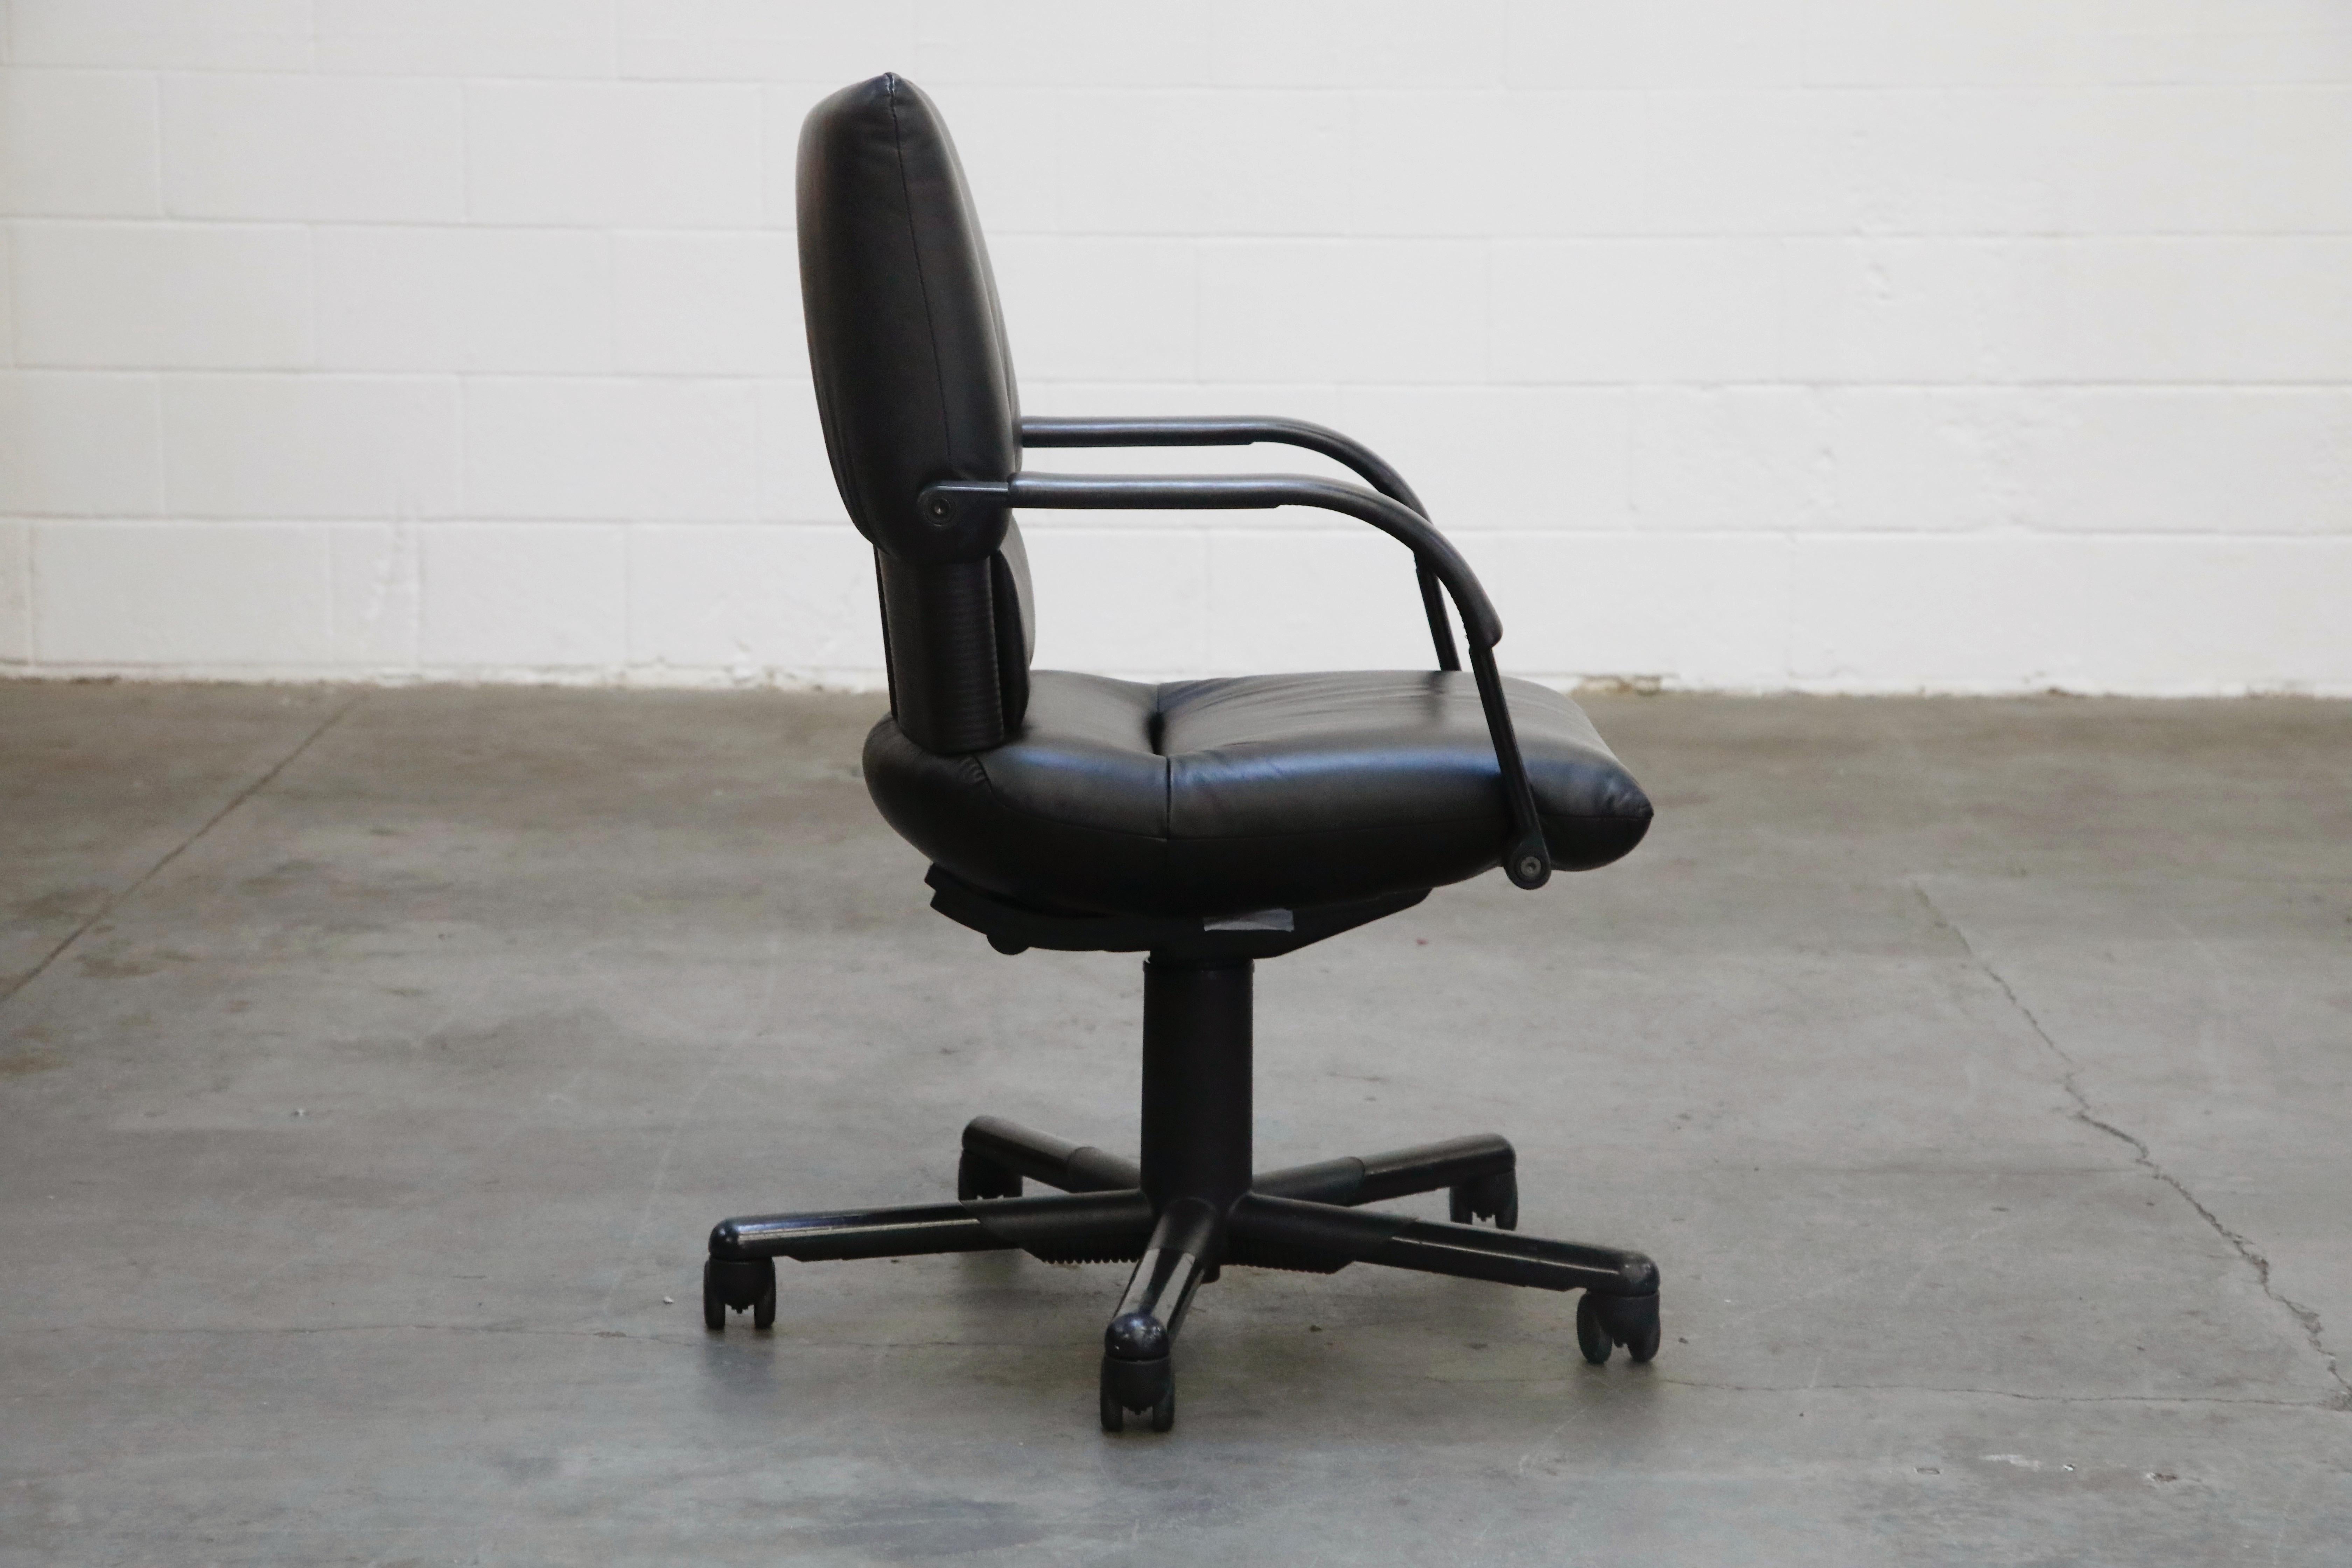 Swiss Mario Bellini Post-Modern Executive Desk Chair for Vitra, Signed and Dated 1992 For Sale